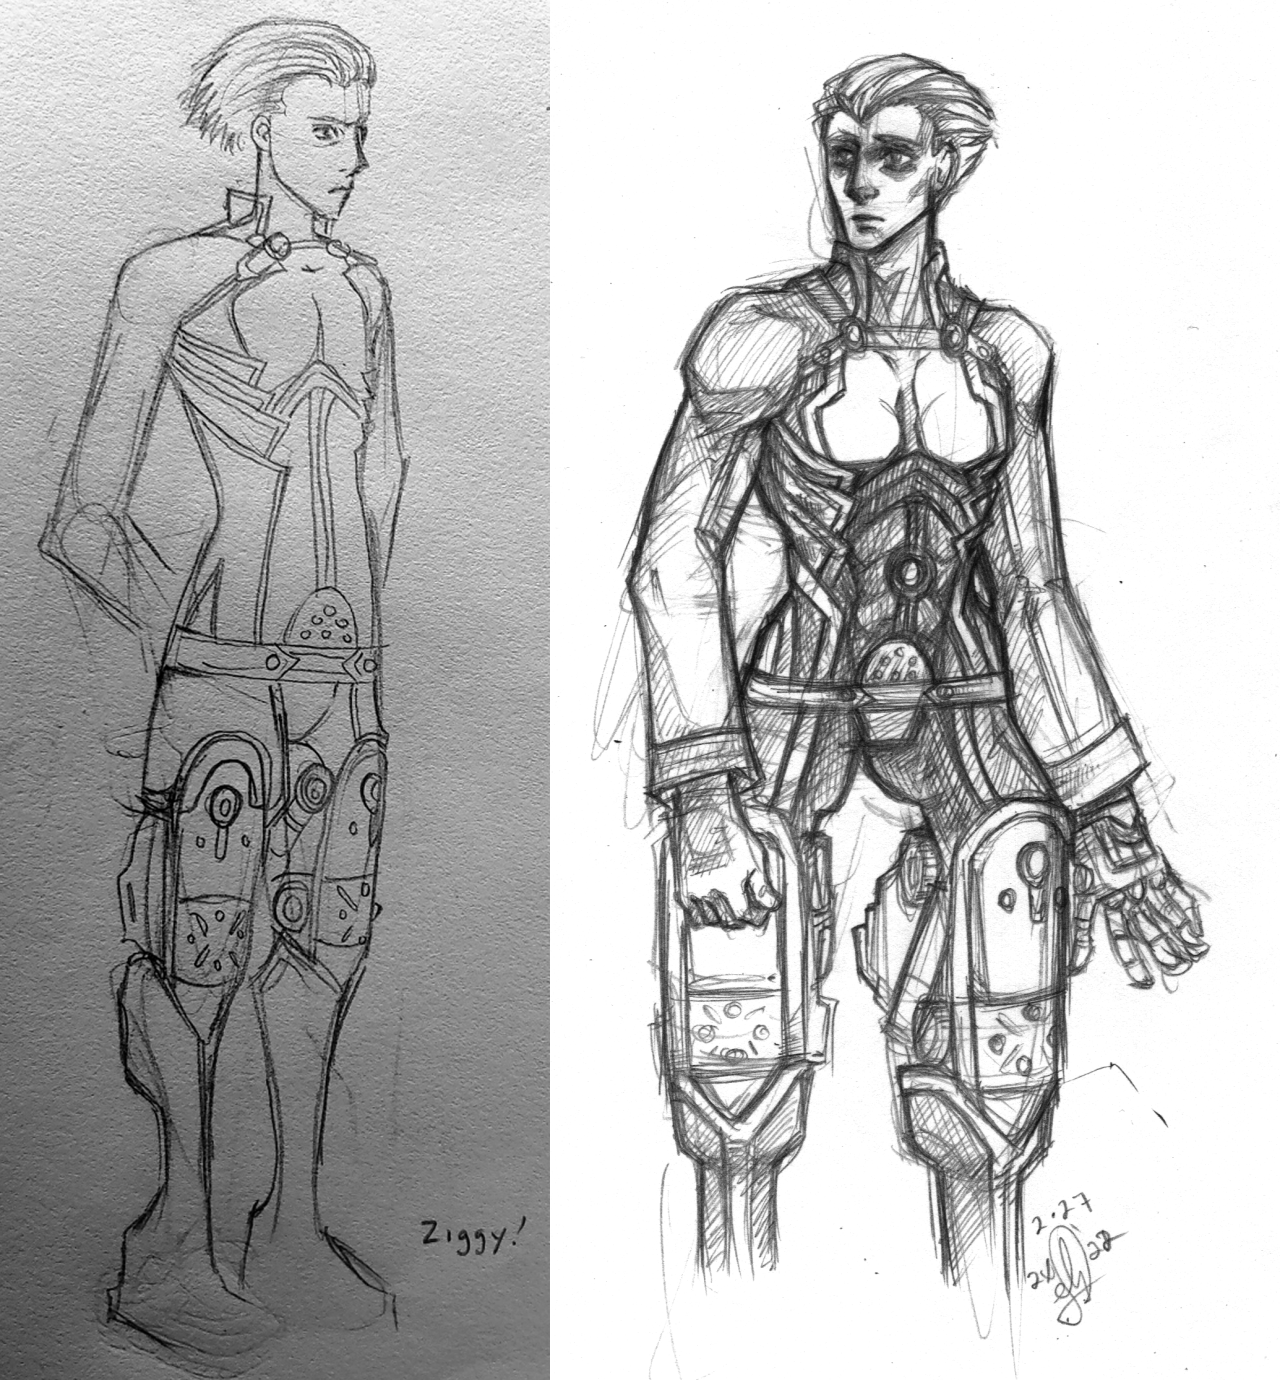 Two pencil sketches of Ziggurat 8 from Xenosaga, the first drawn in 2003 or 2004 and the second in 2022.